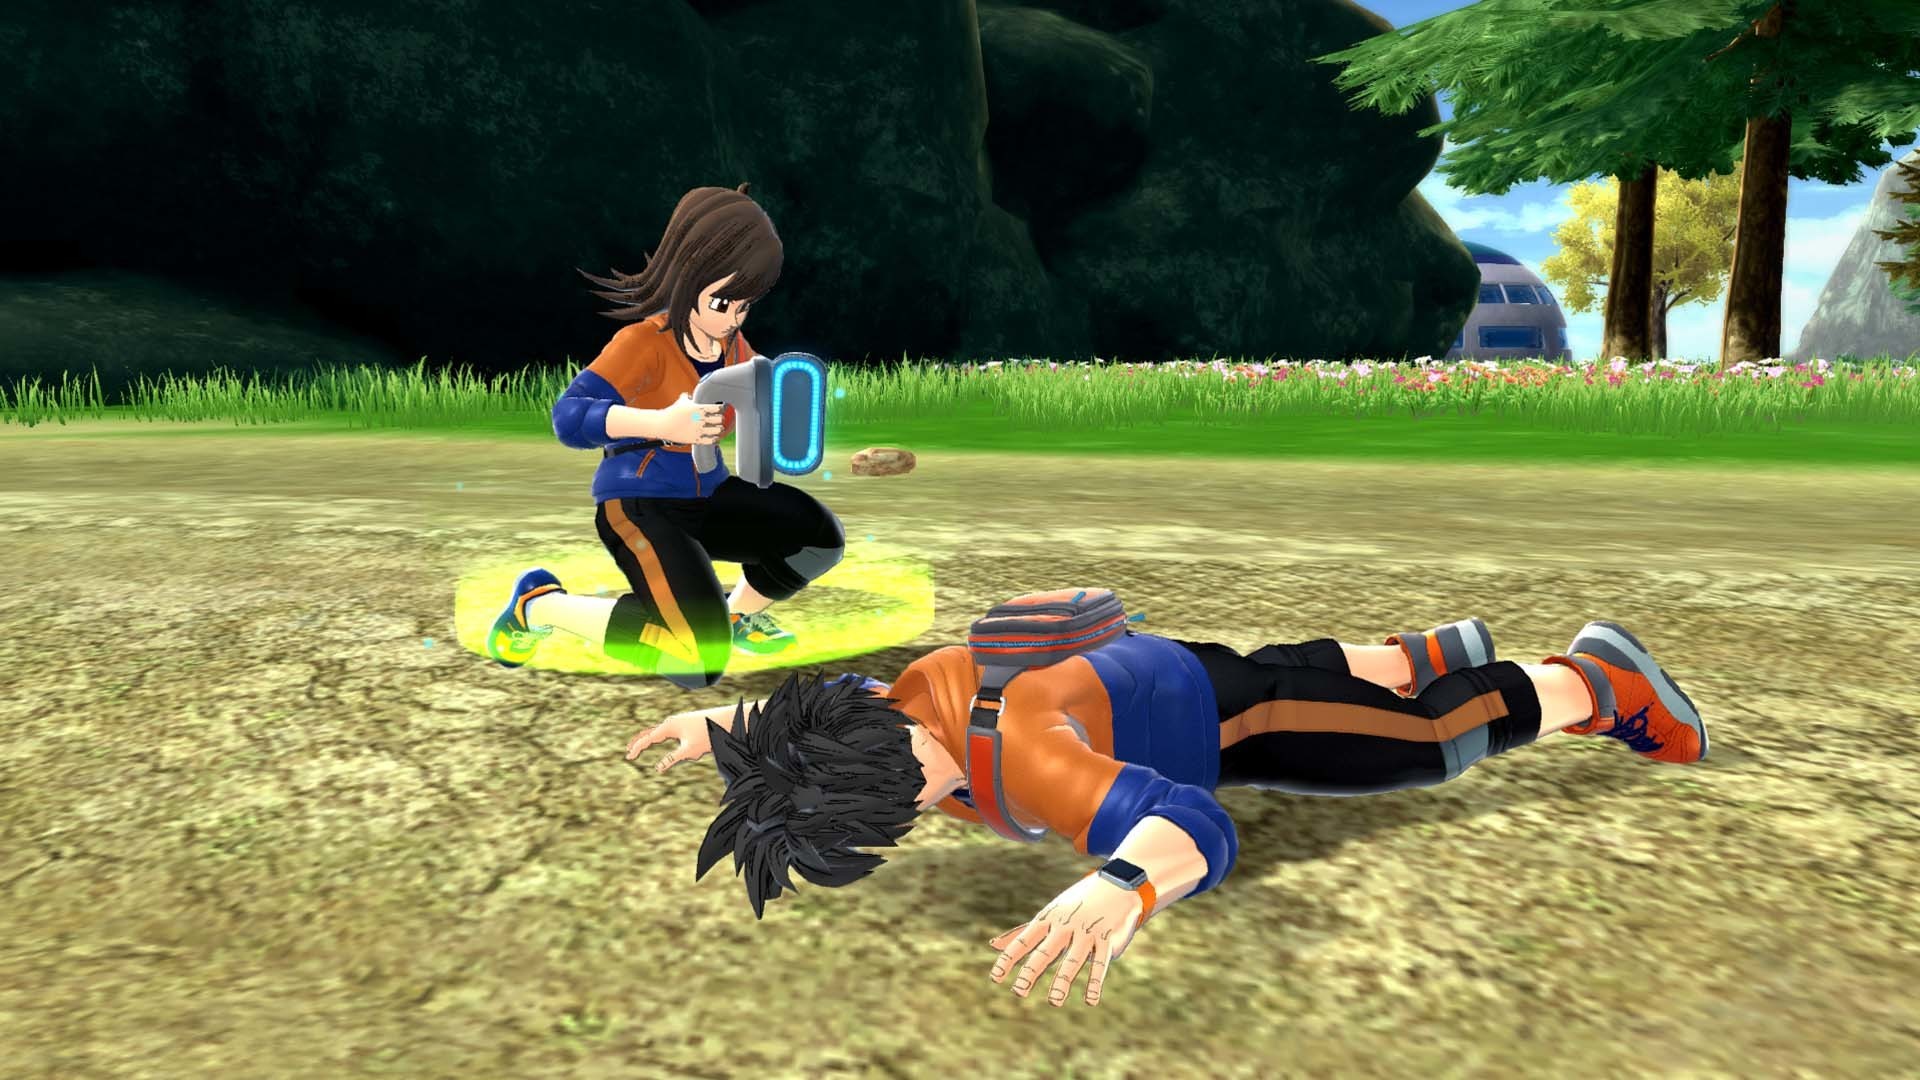 Dragon Ball: The Breakers Is Getting Crossplay!? 